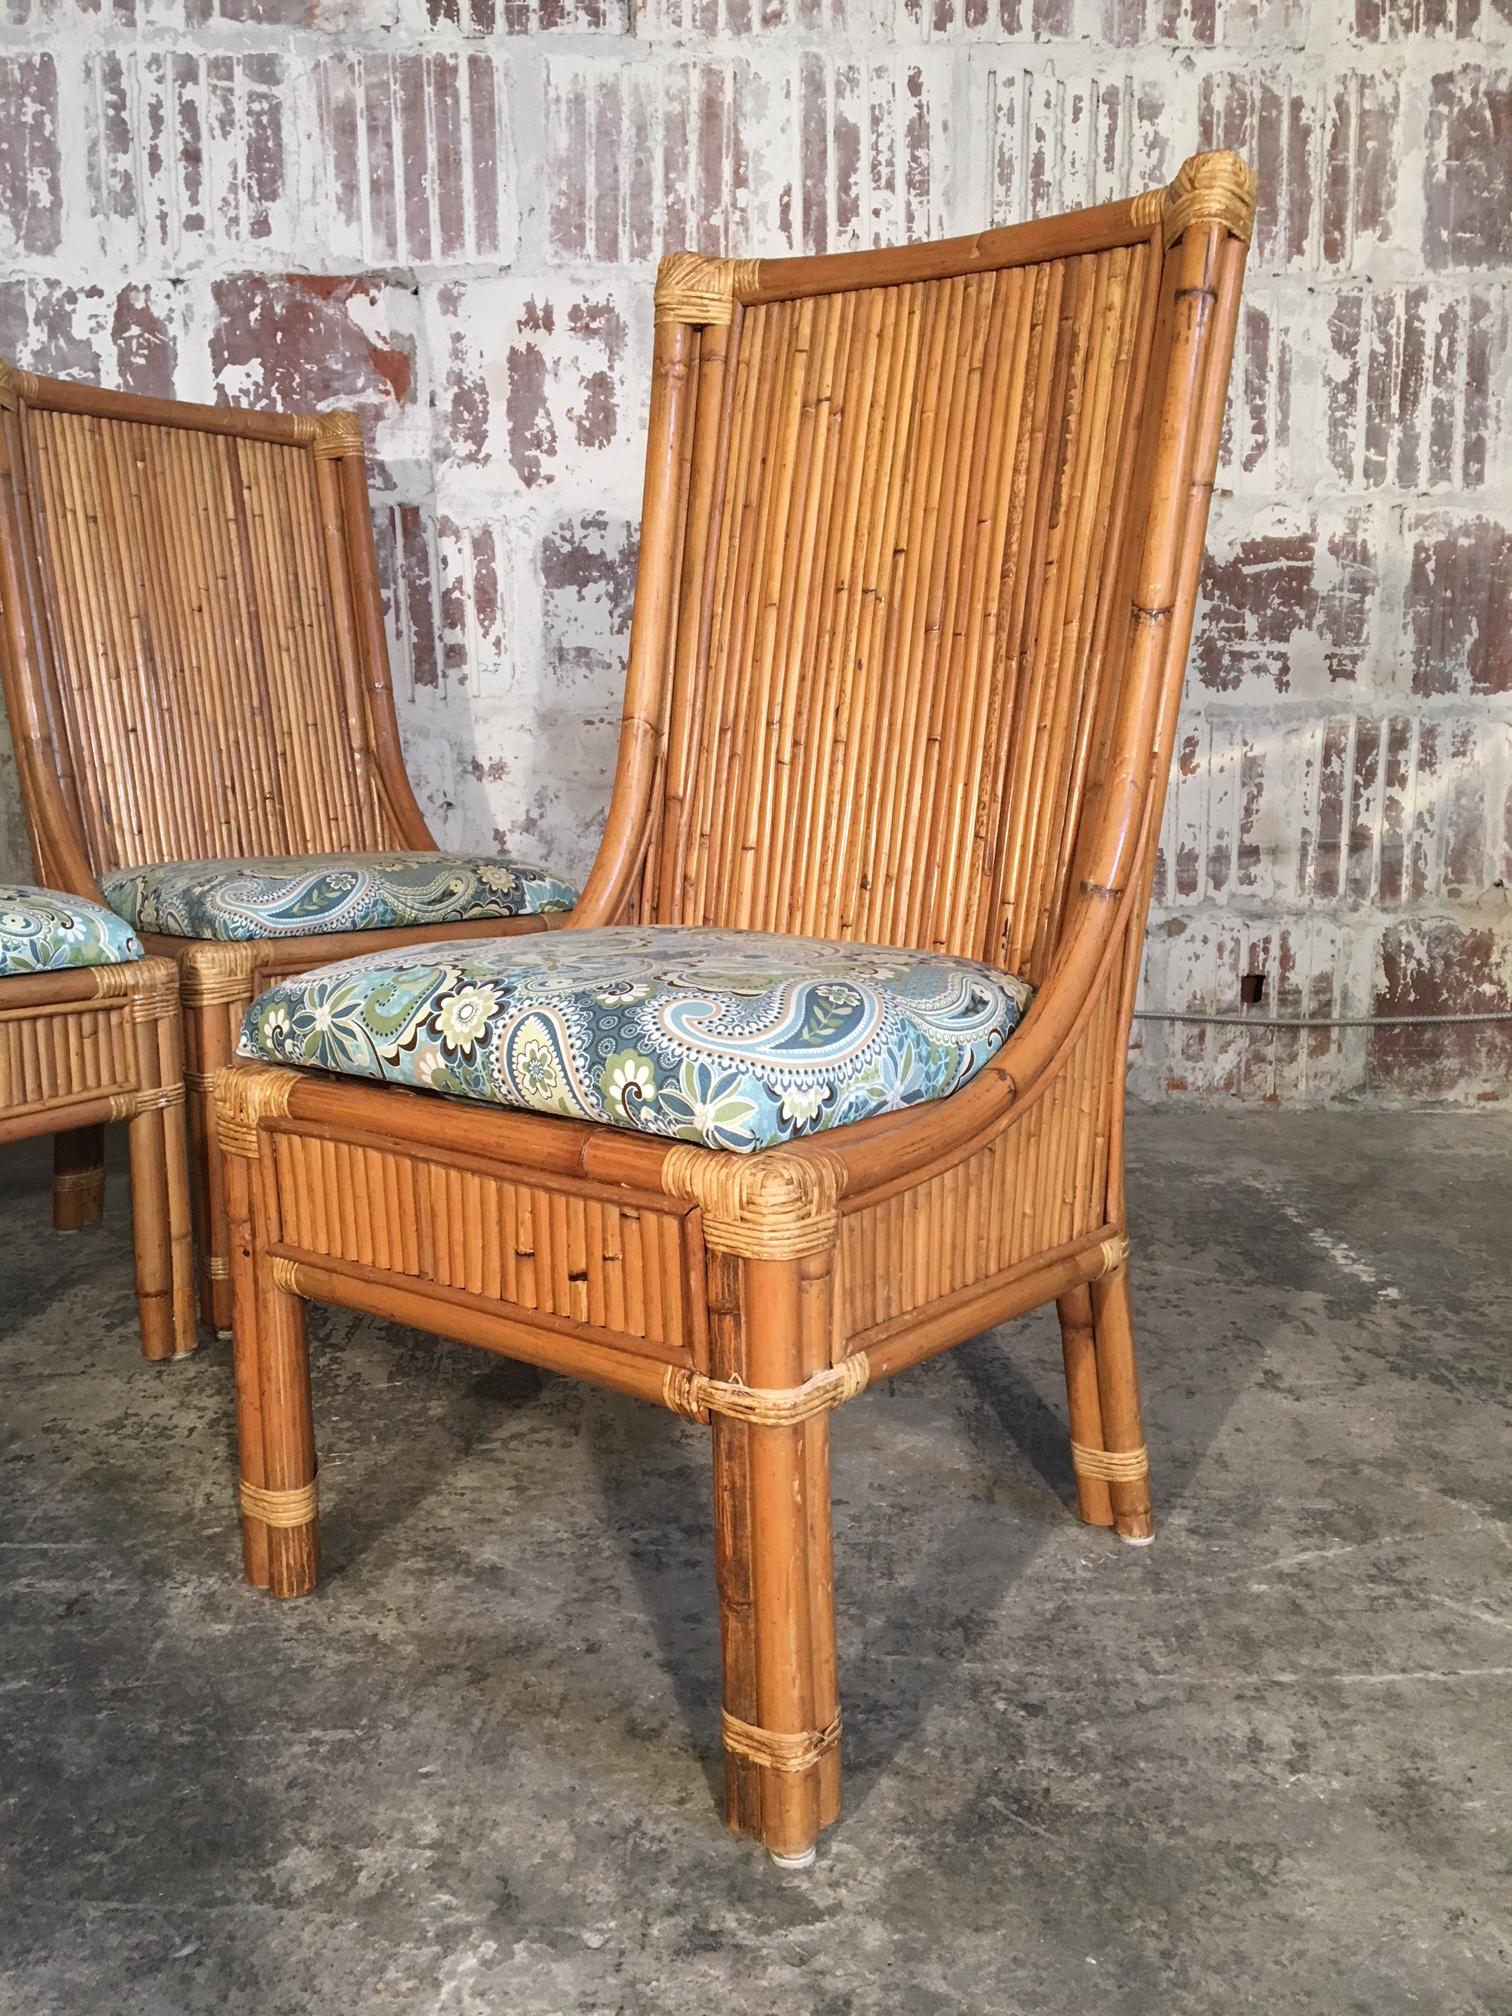 Set of 4 high back split pencil reed rattan dining chairs add a tropical touch to any decor. Very good vintage condition with minor signs of age appropriate wear. Structurally sound. Professional reupholstery available.